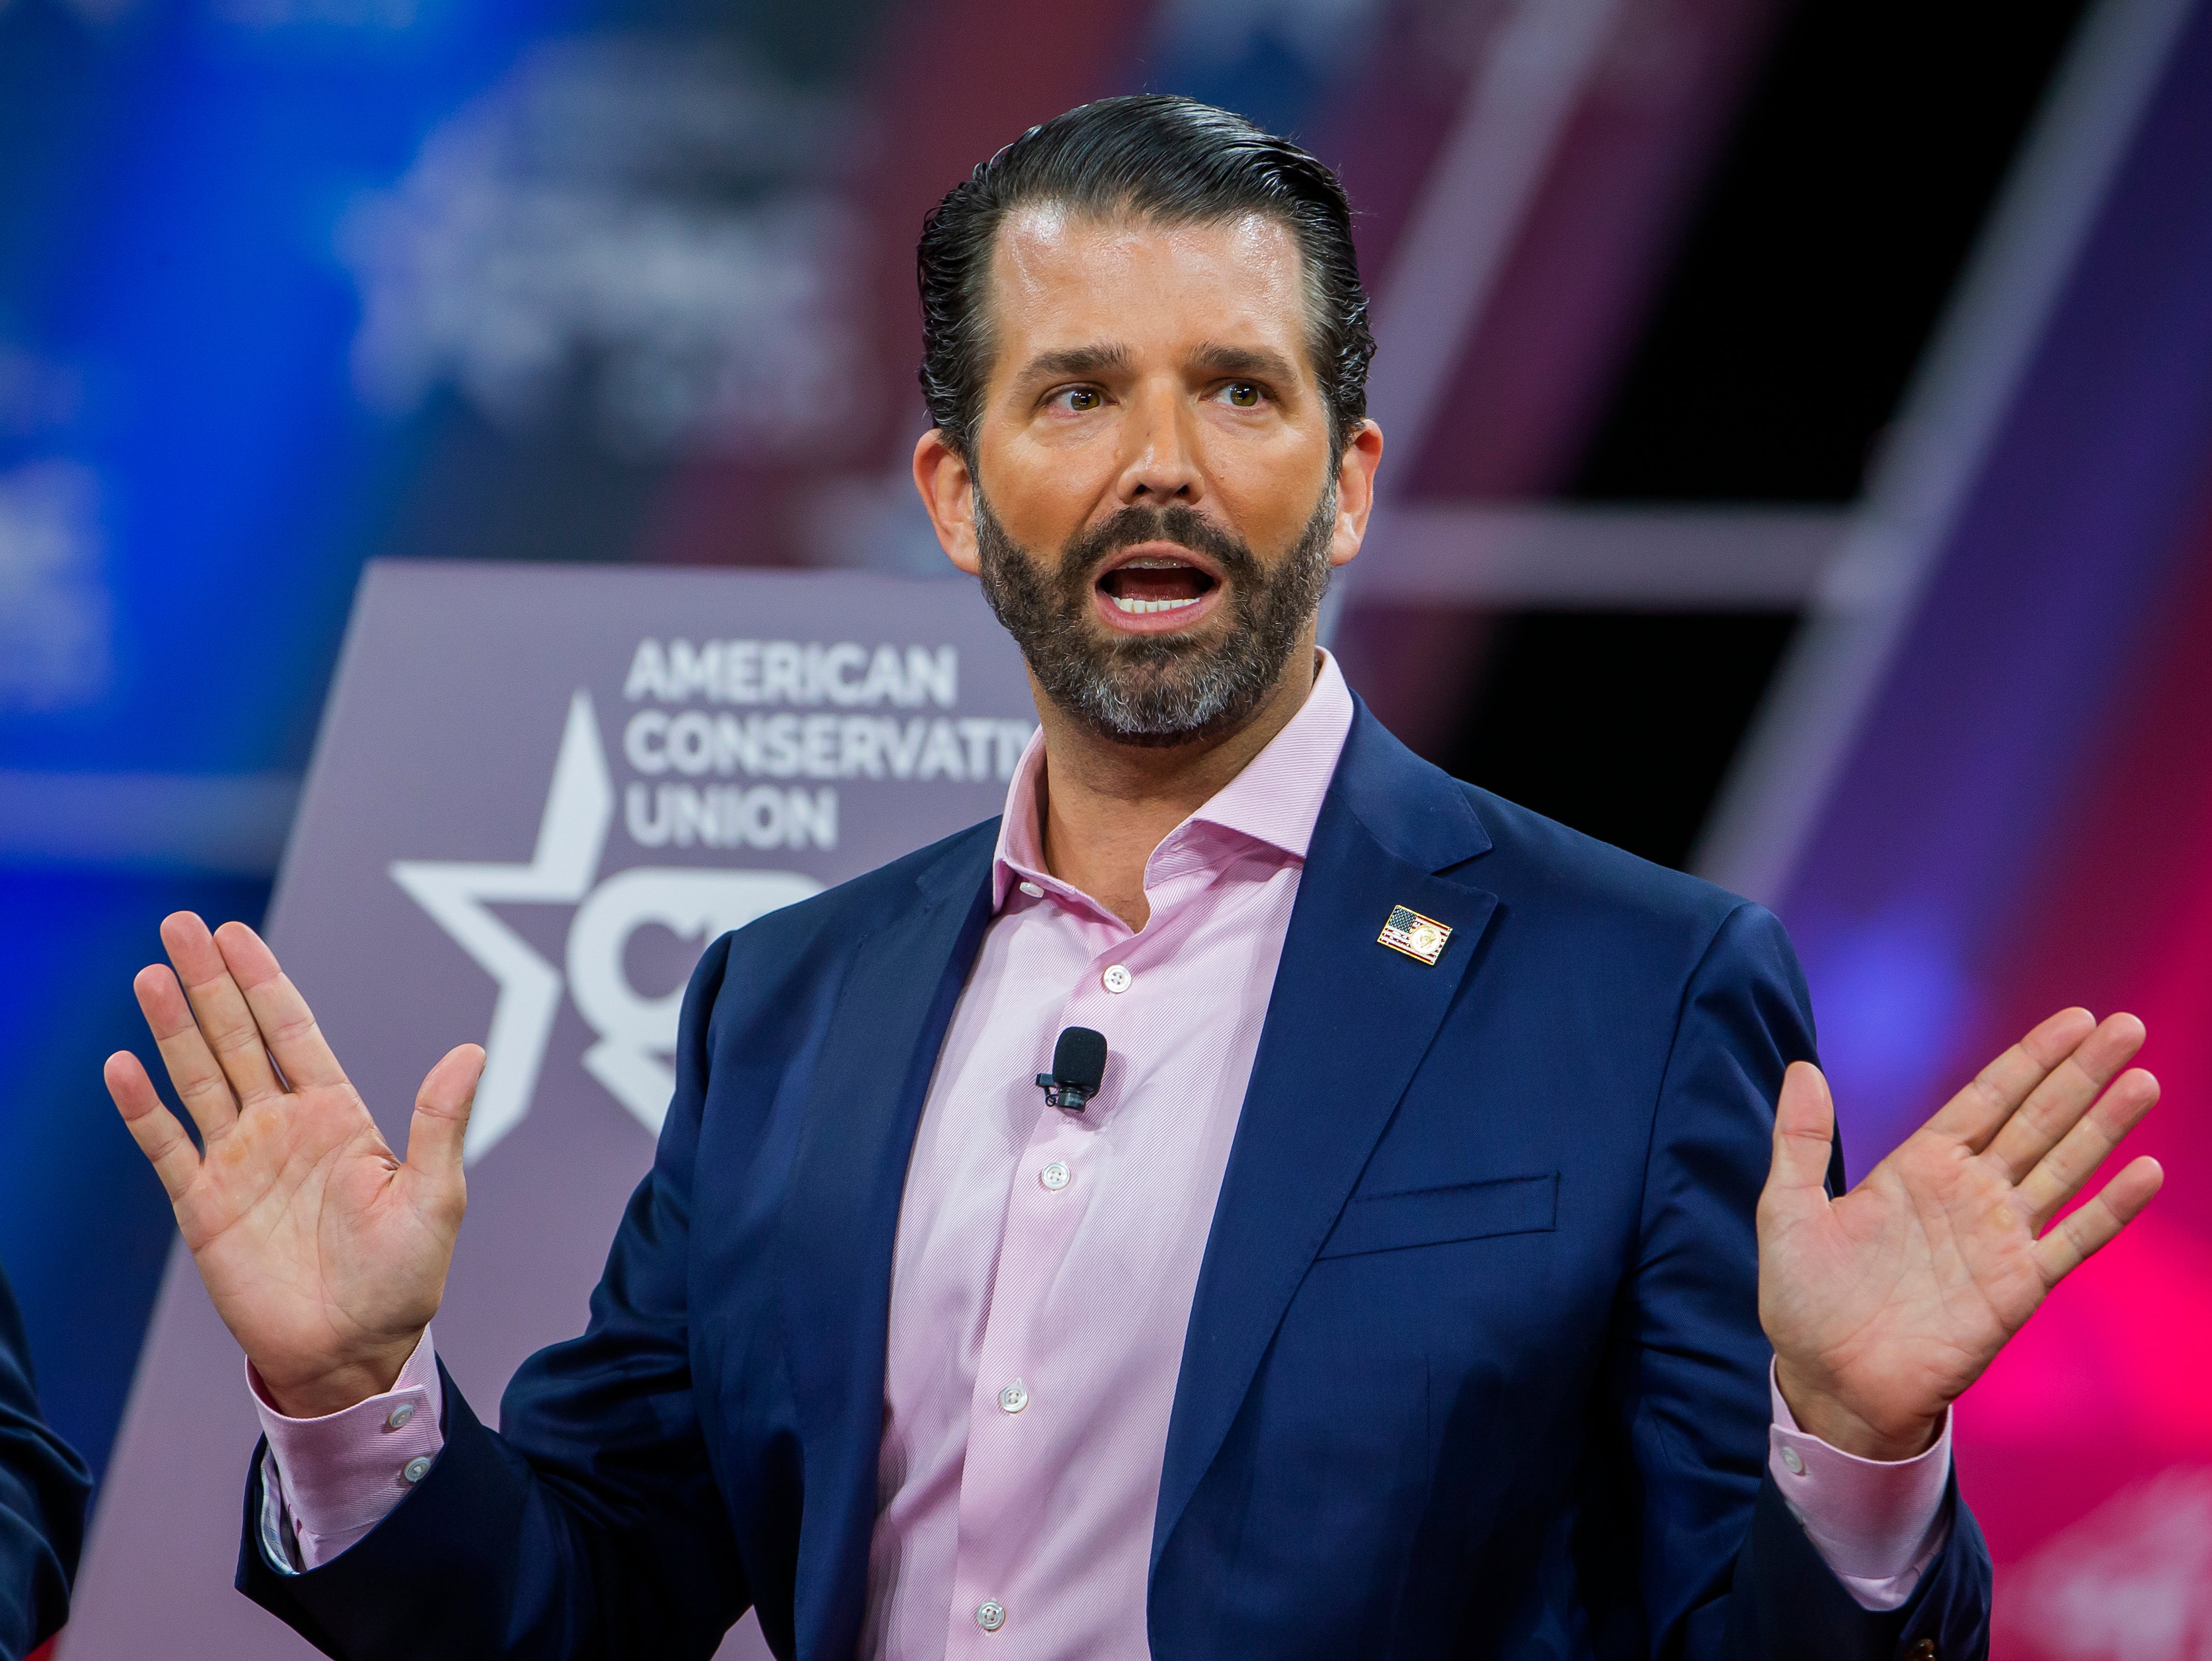 Donald Trump Jr speaks at the 47th annual Conservative Political Action Conference (CPAC) at the Gaylord National Resort & Convention Centre in National Harbor, Maryland, on 28 February 2020